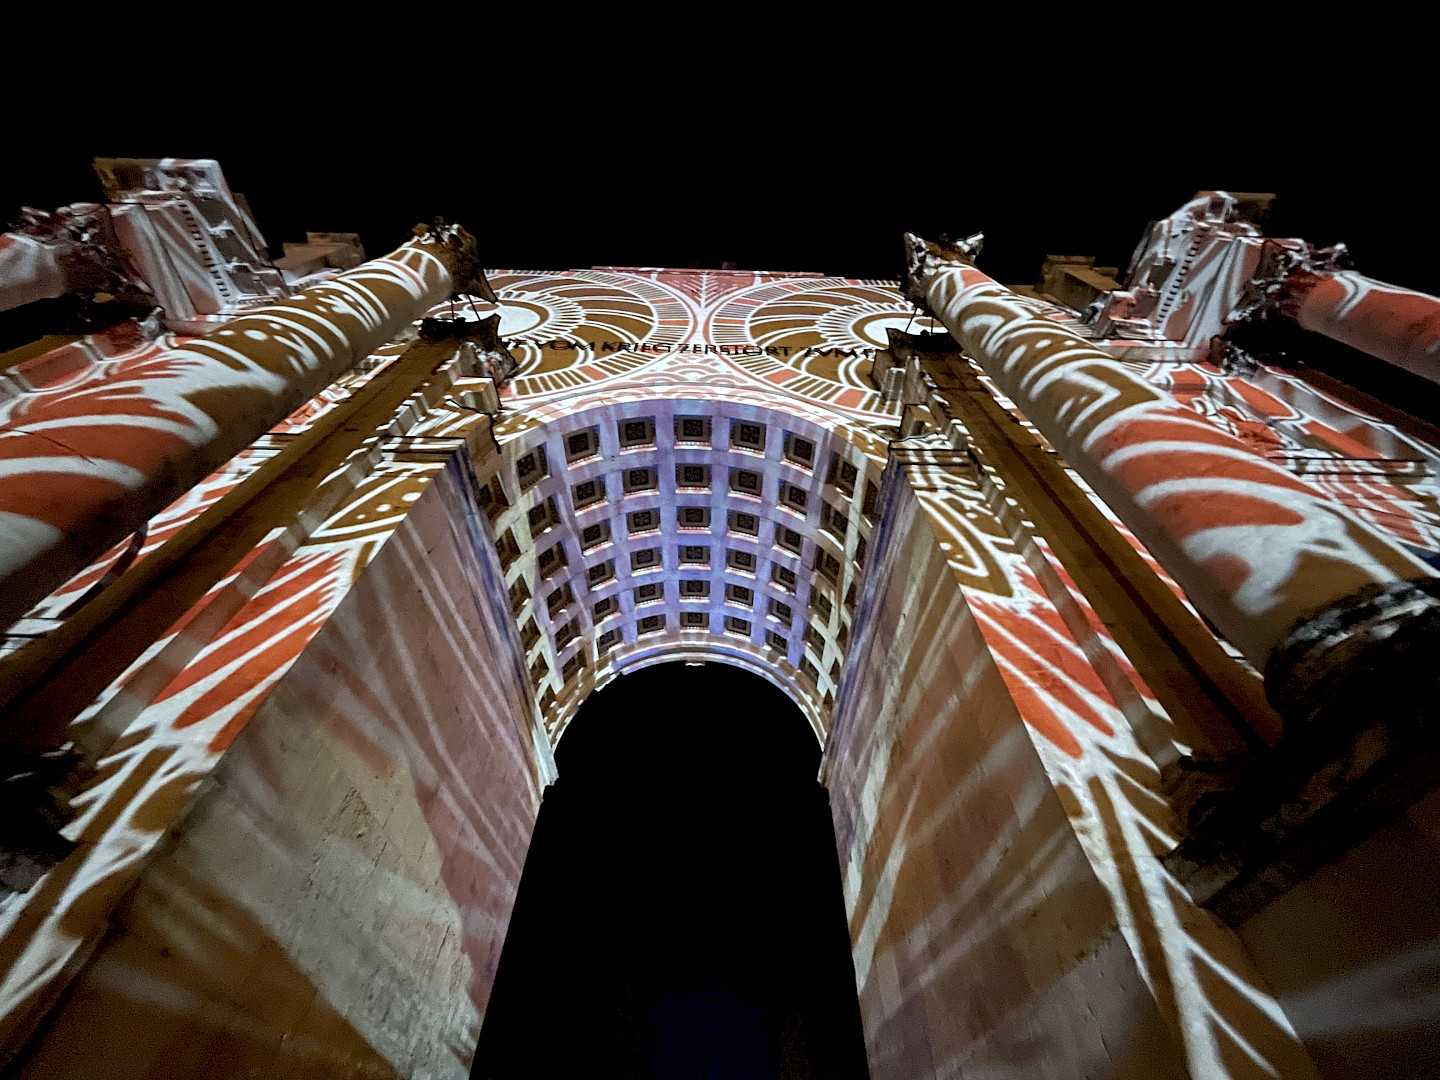 The colorful patterns projected onto the large Siegestor Monument are impressive and colorful in the dark.